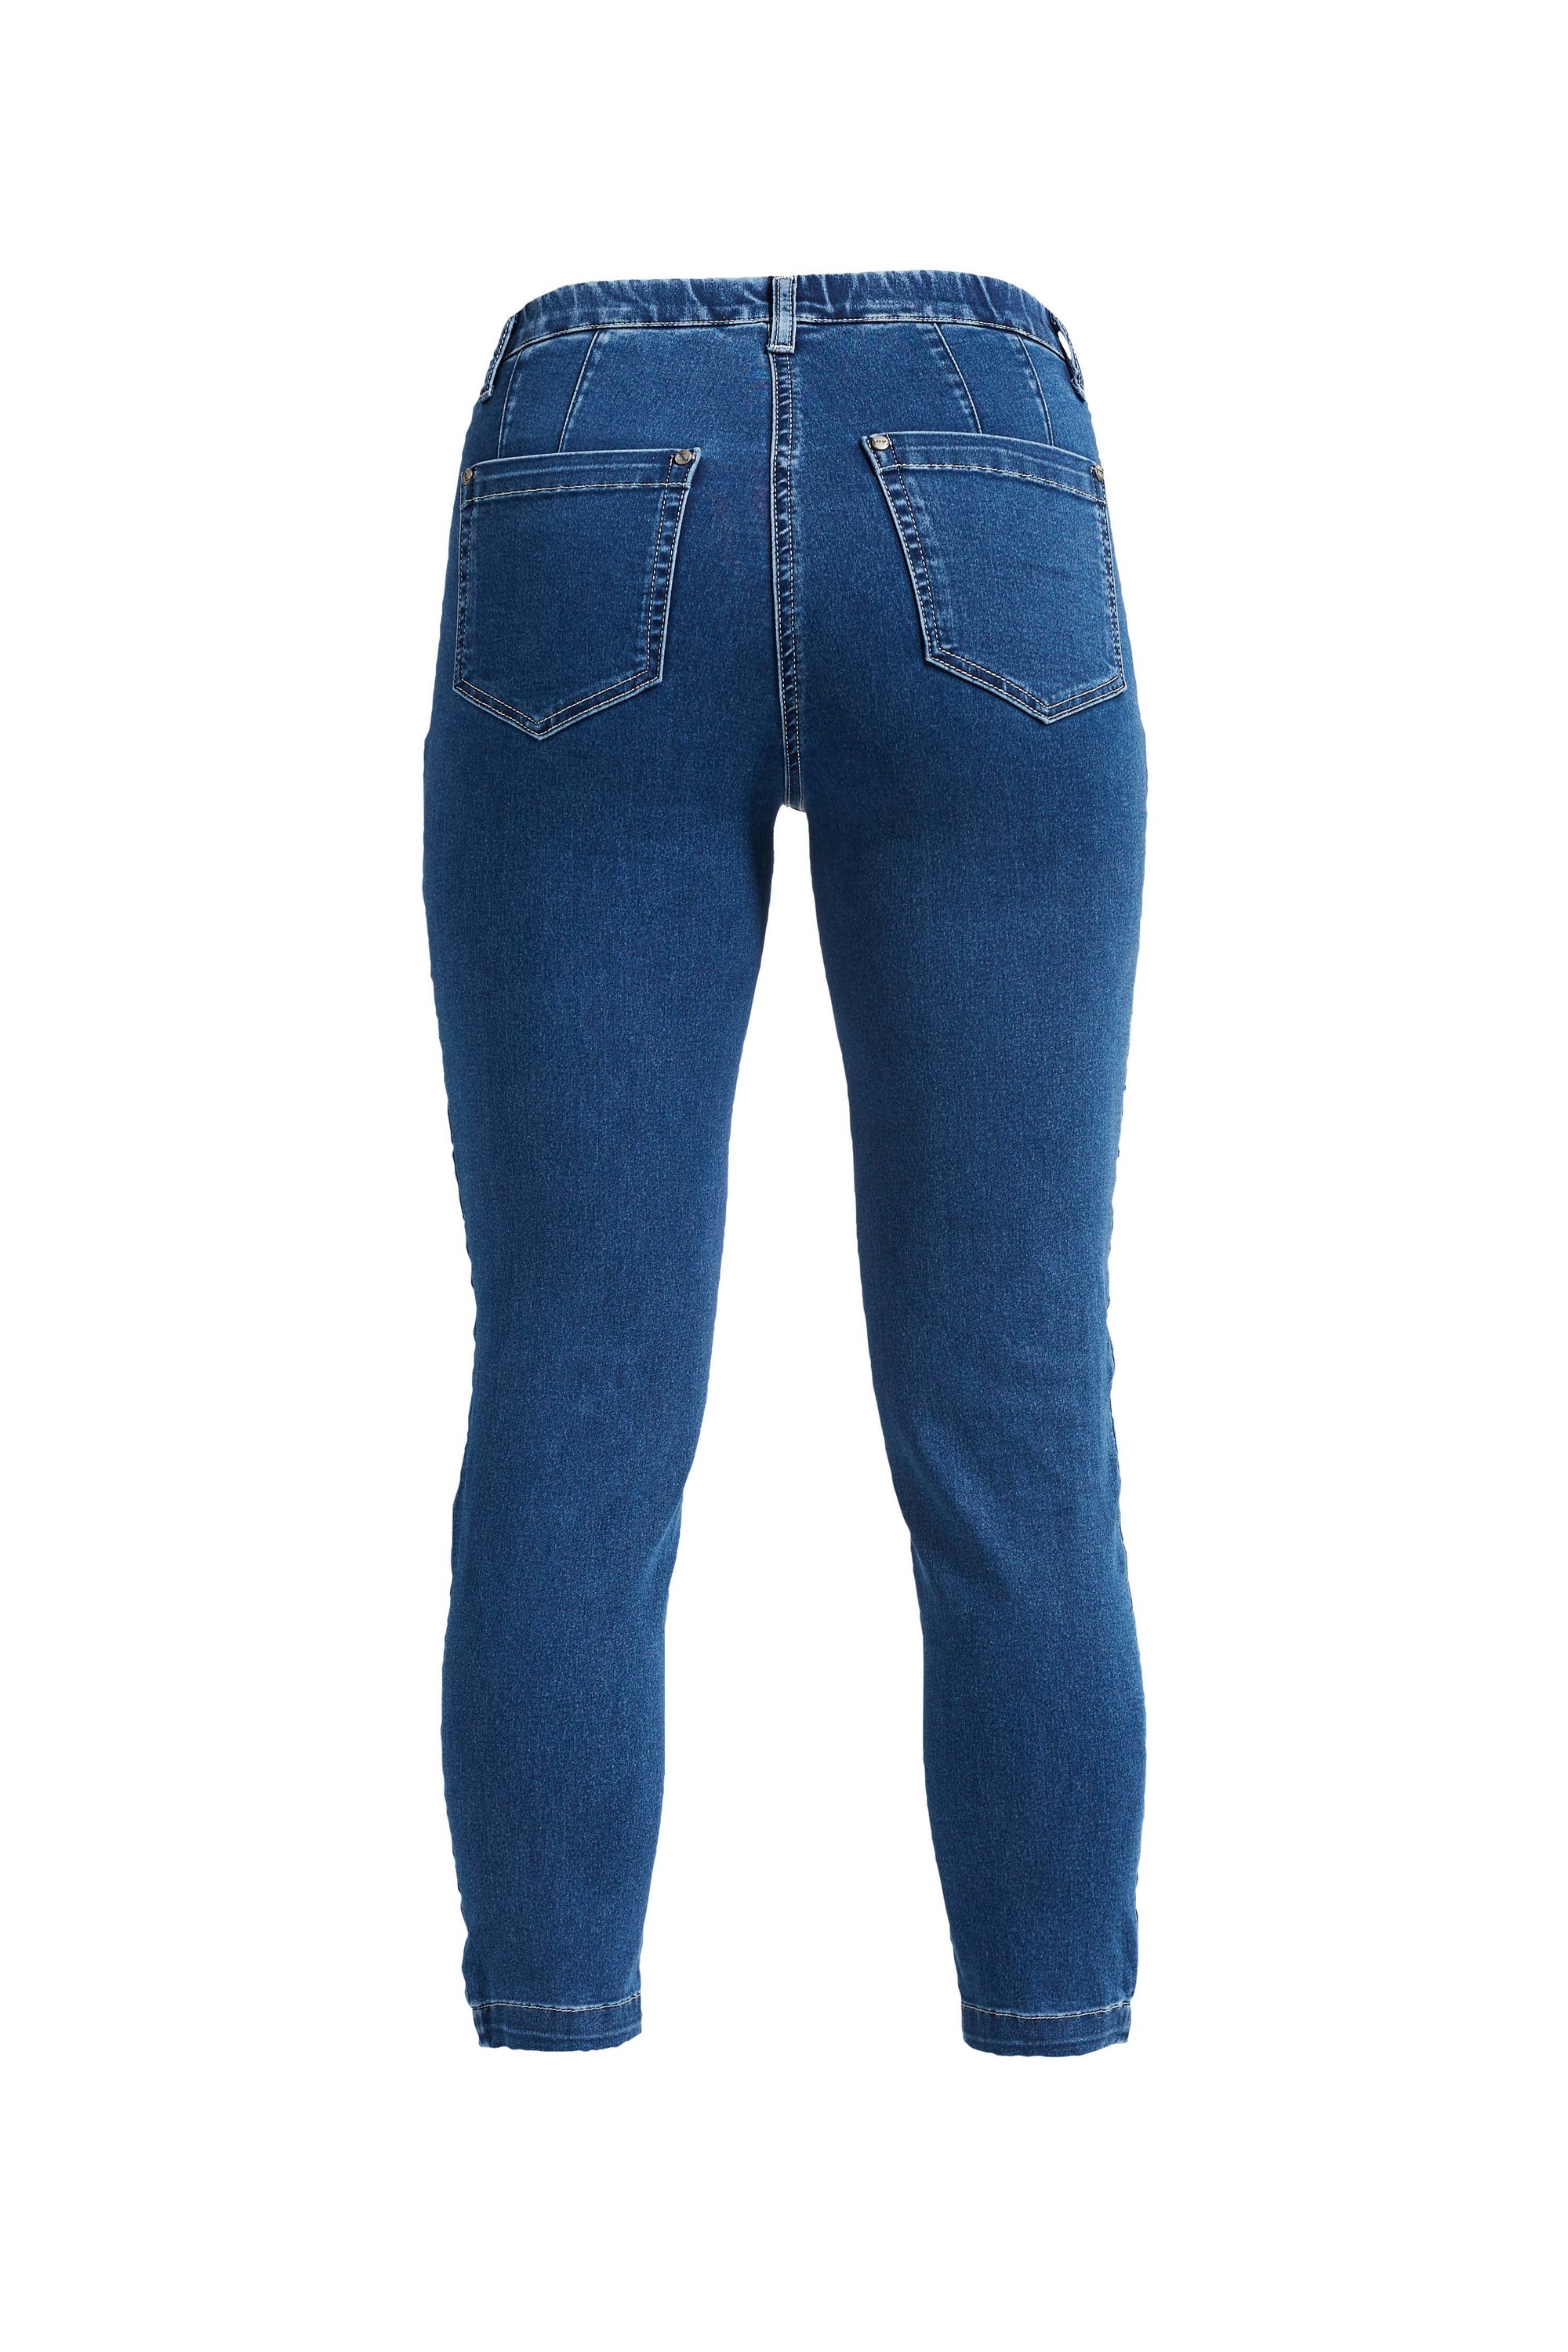 LauRie Jeans Madison in Blau 